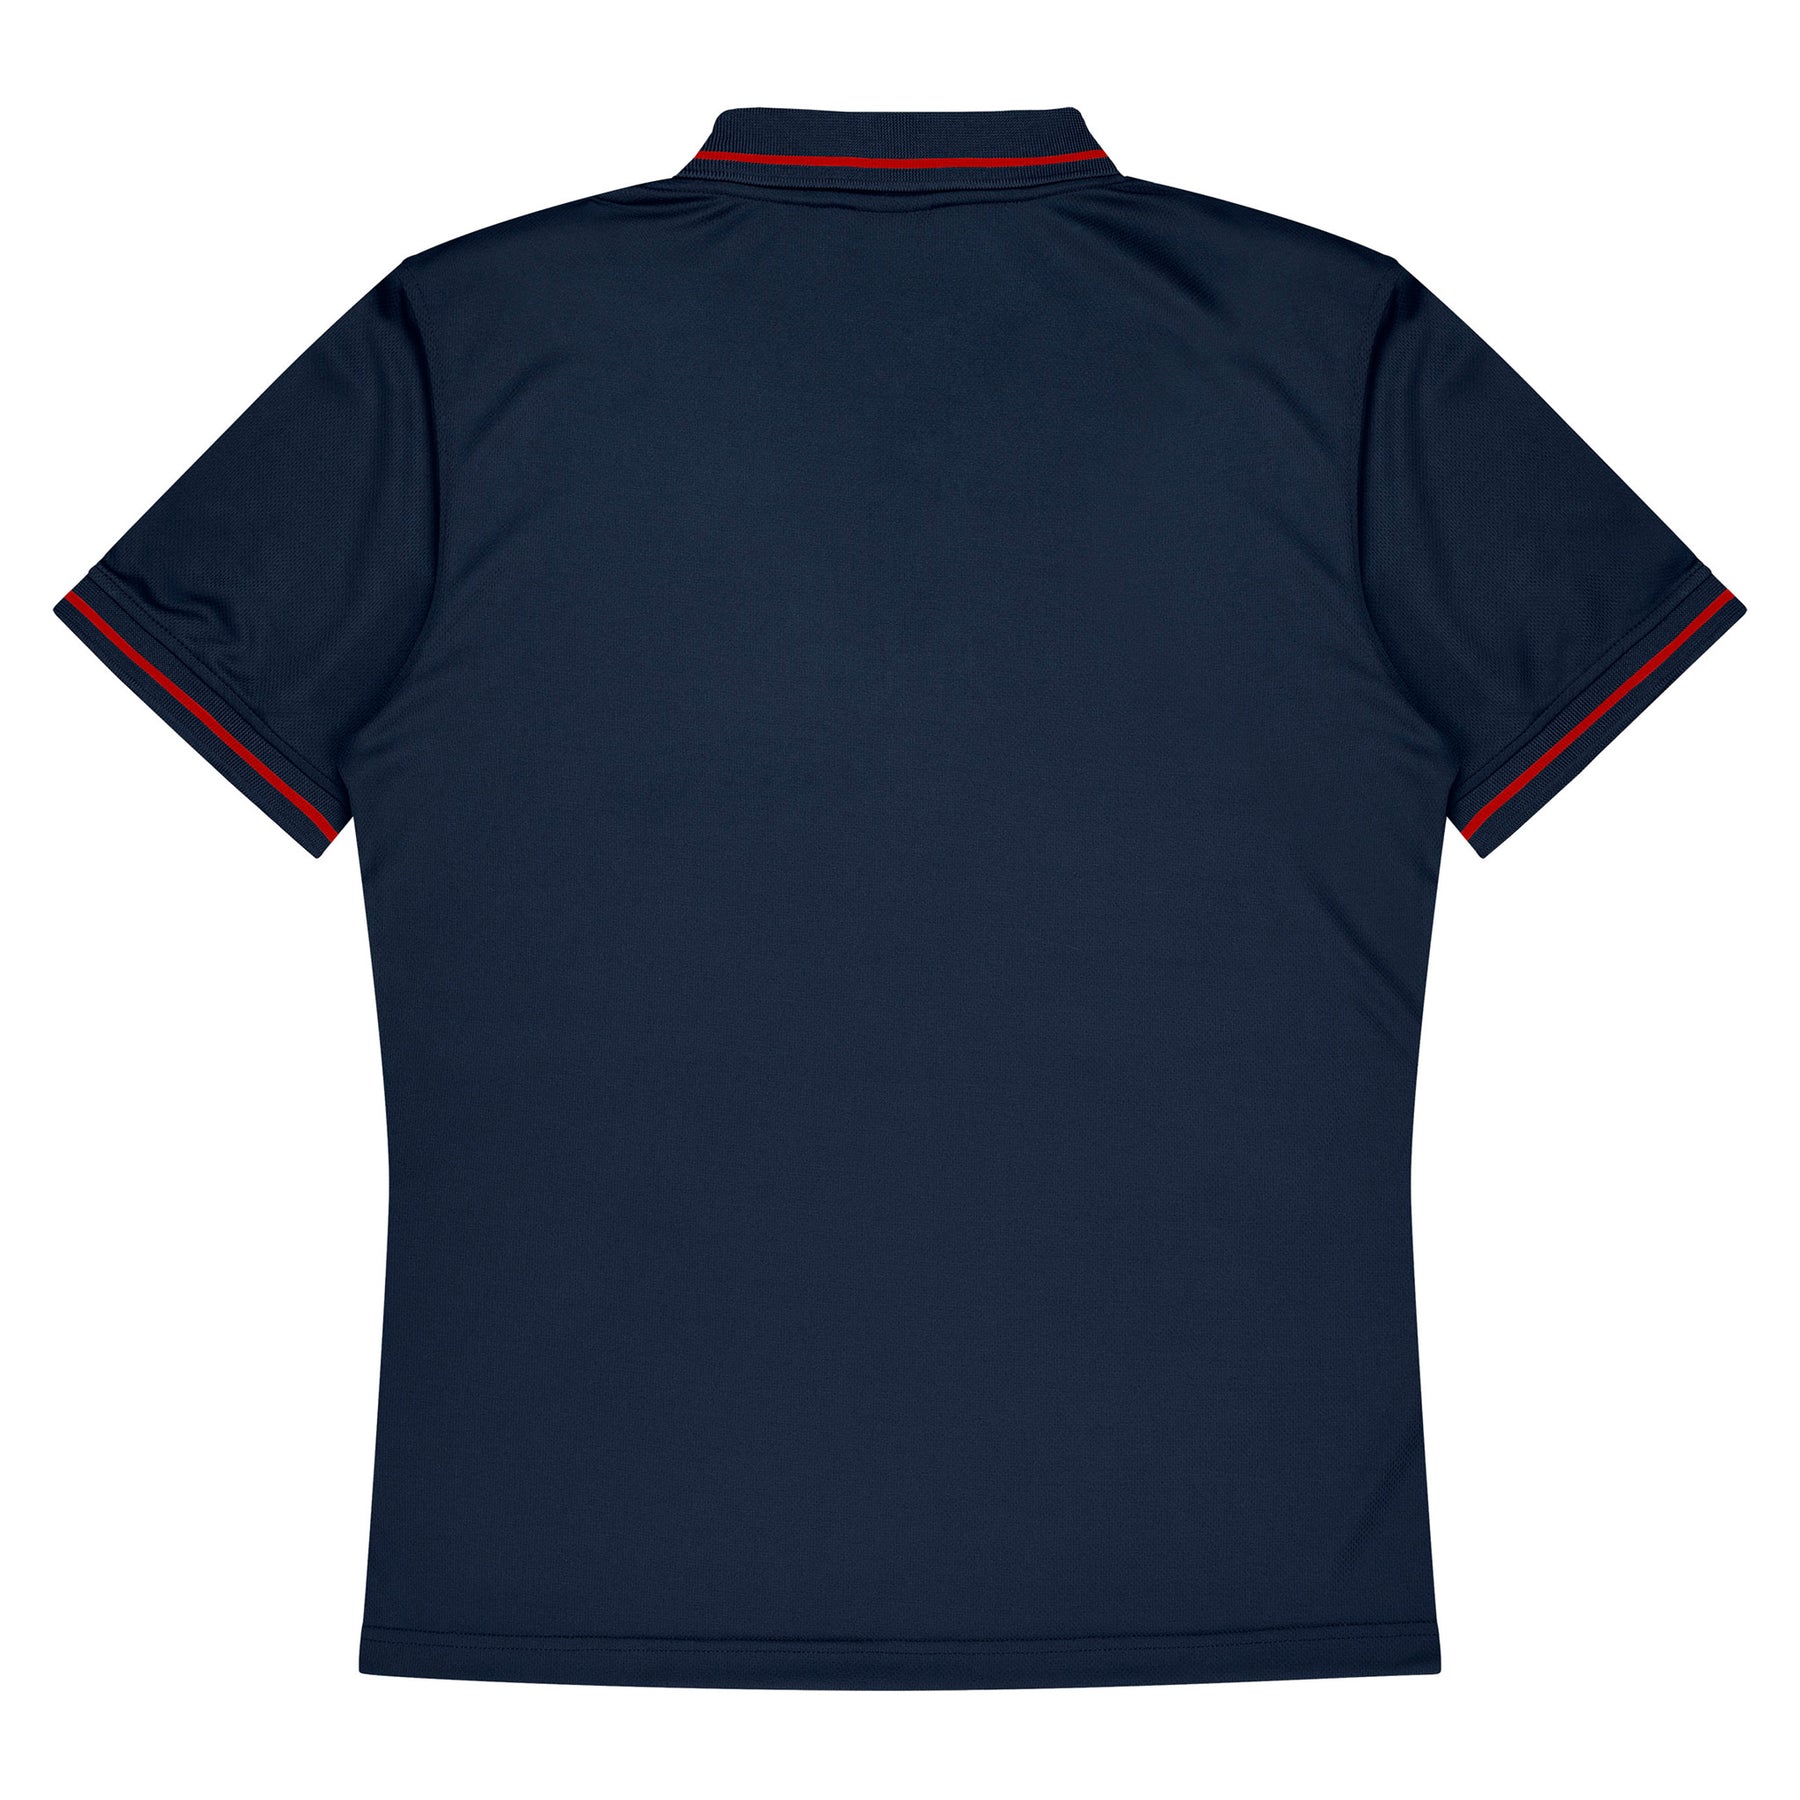 aussie pacific cottesloe mens polo in navy red